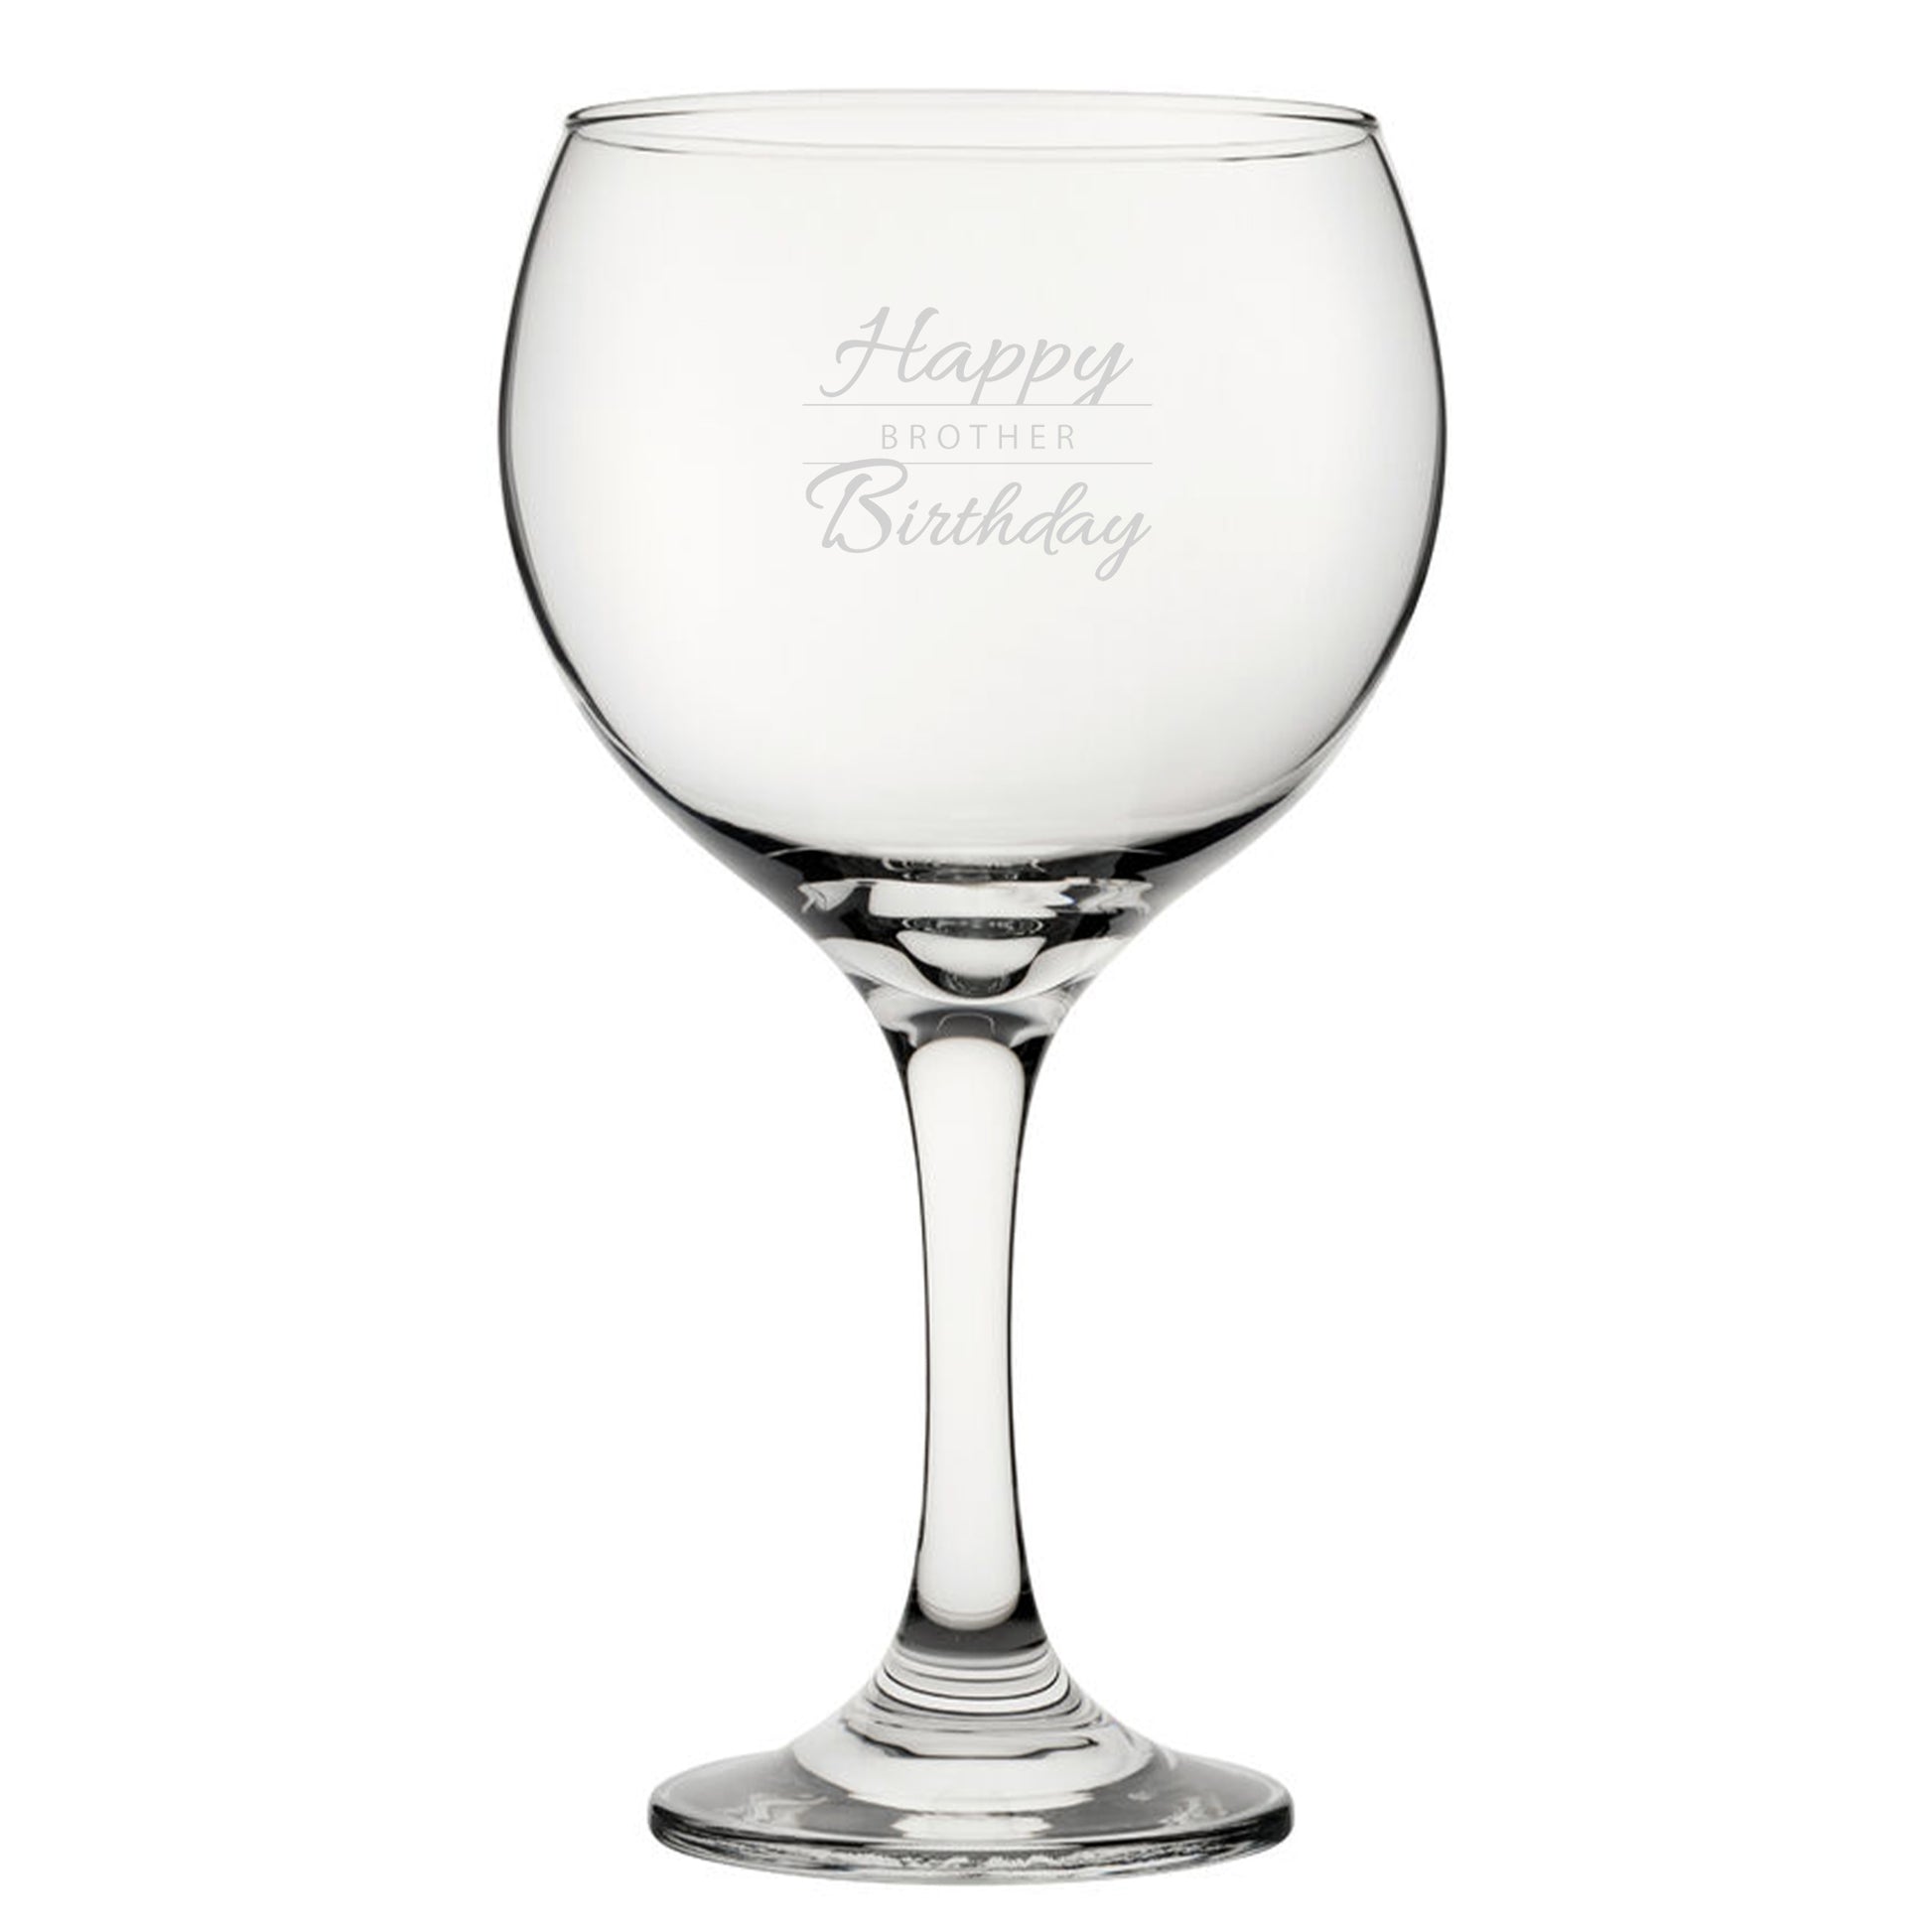 Happy Birthday Brother Modern Design - Engraved Novelty Gin Balloon Cocktail Glass Image 2